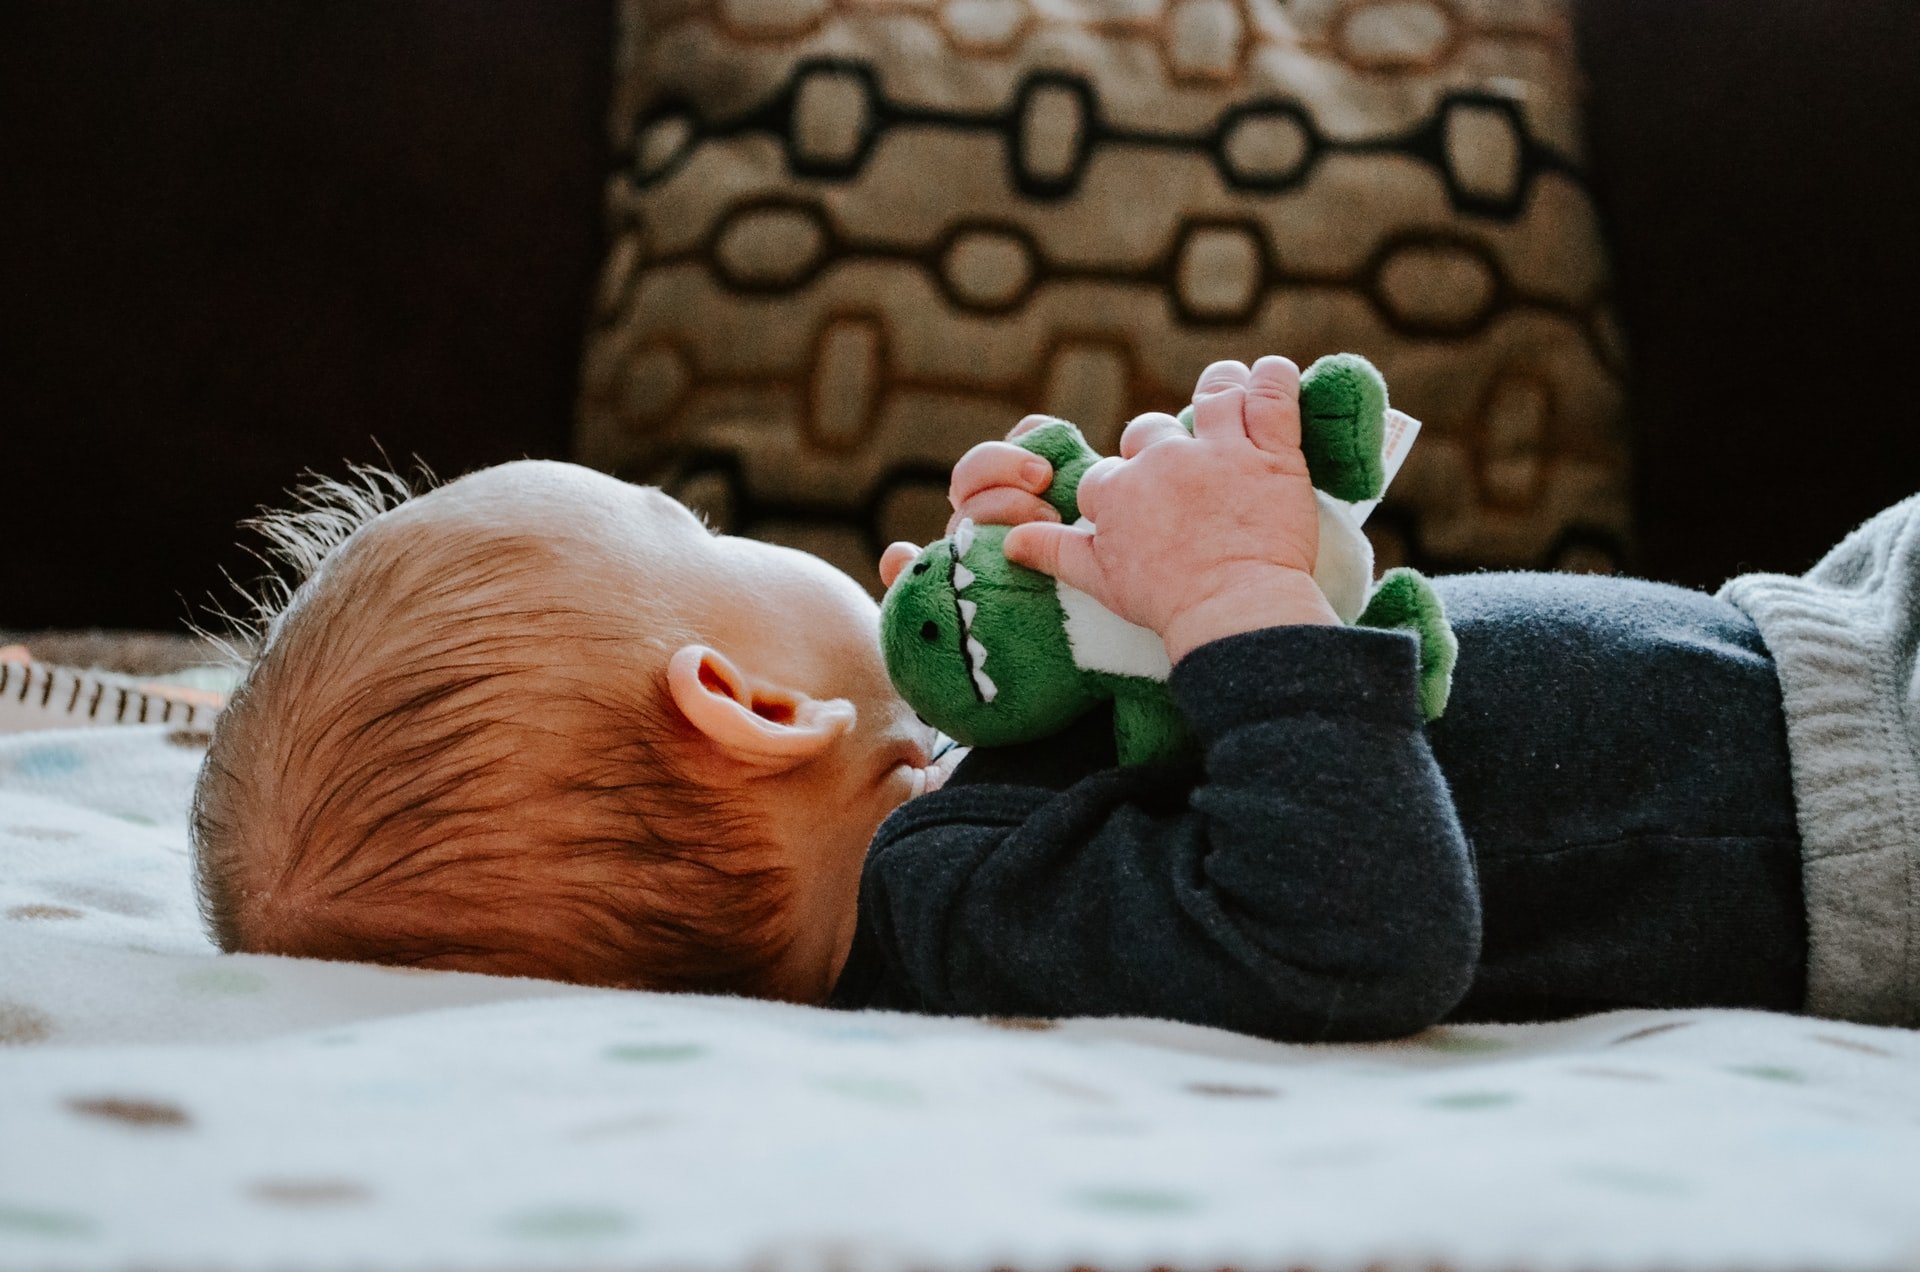 OP's sister moved in with her baby. | Source: Unsplash